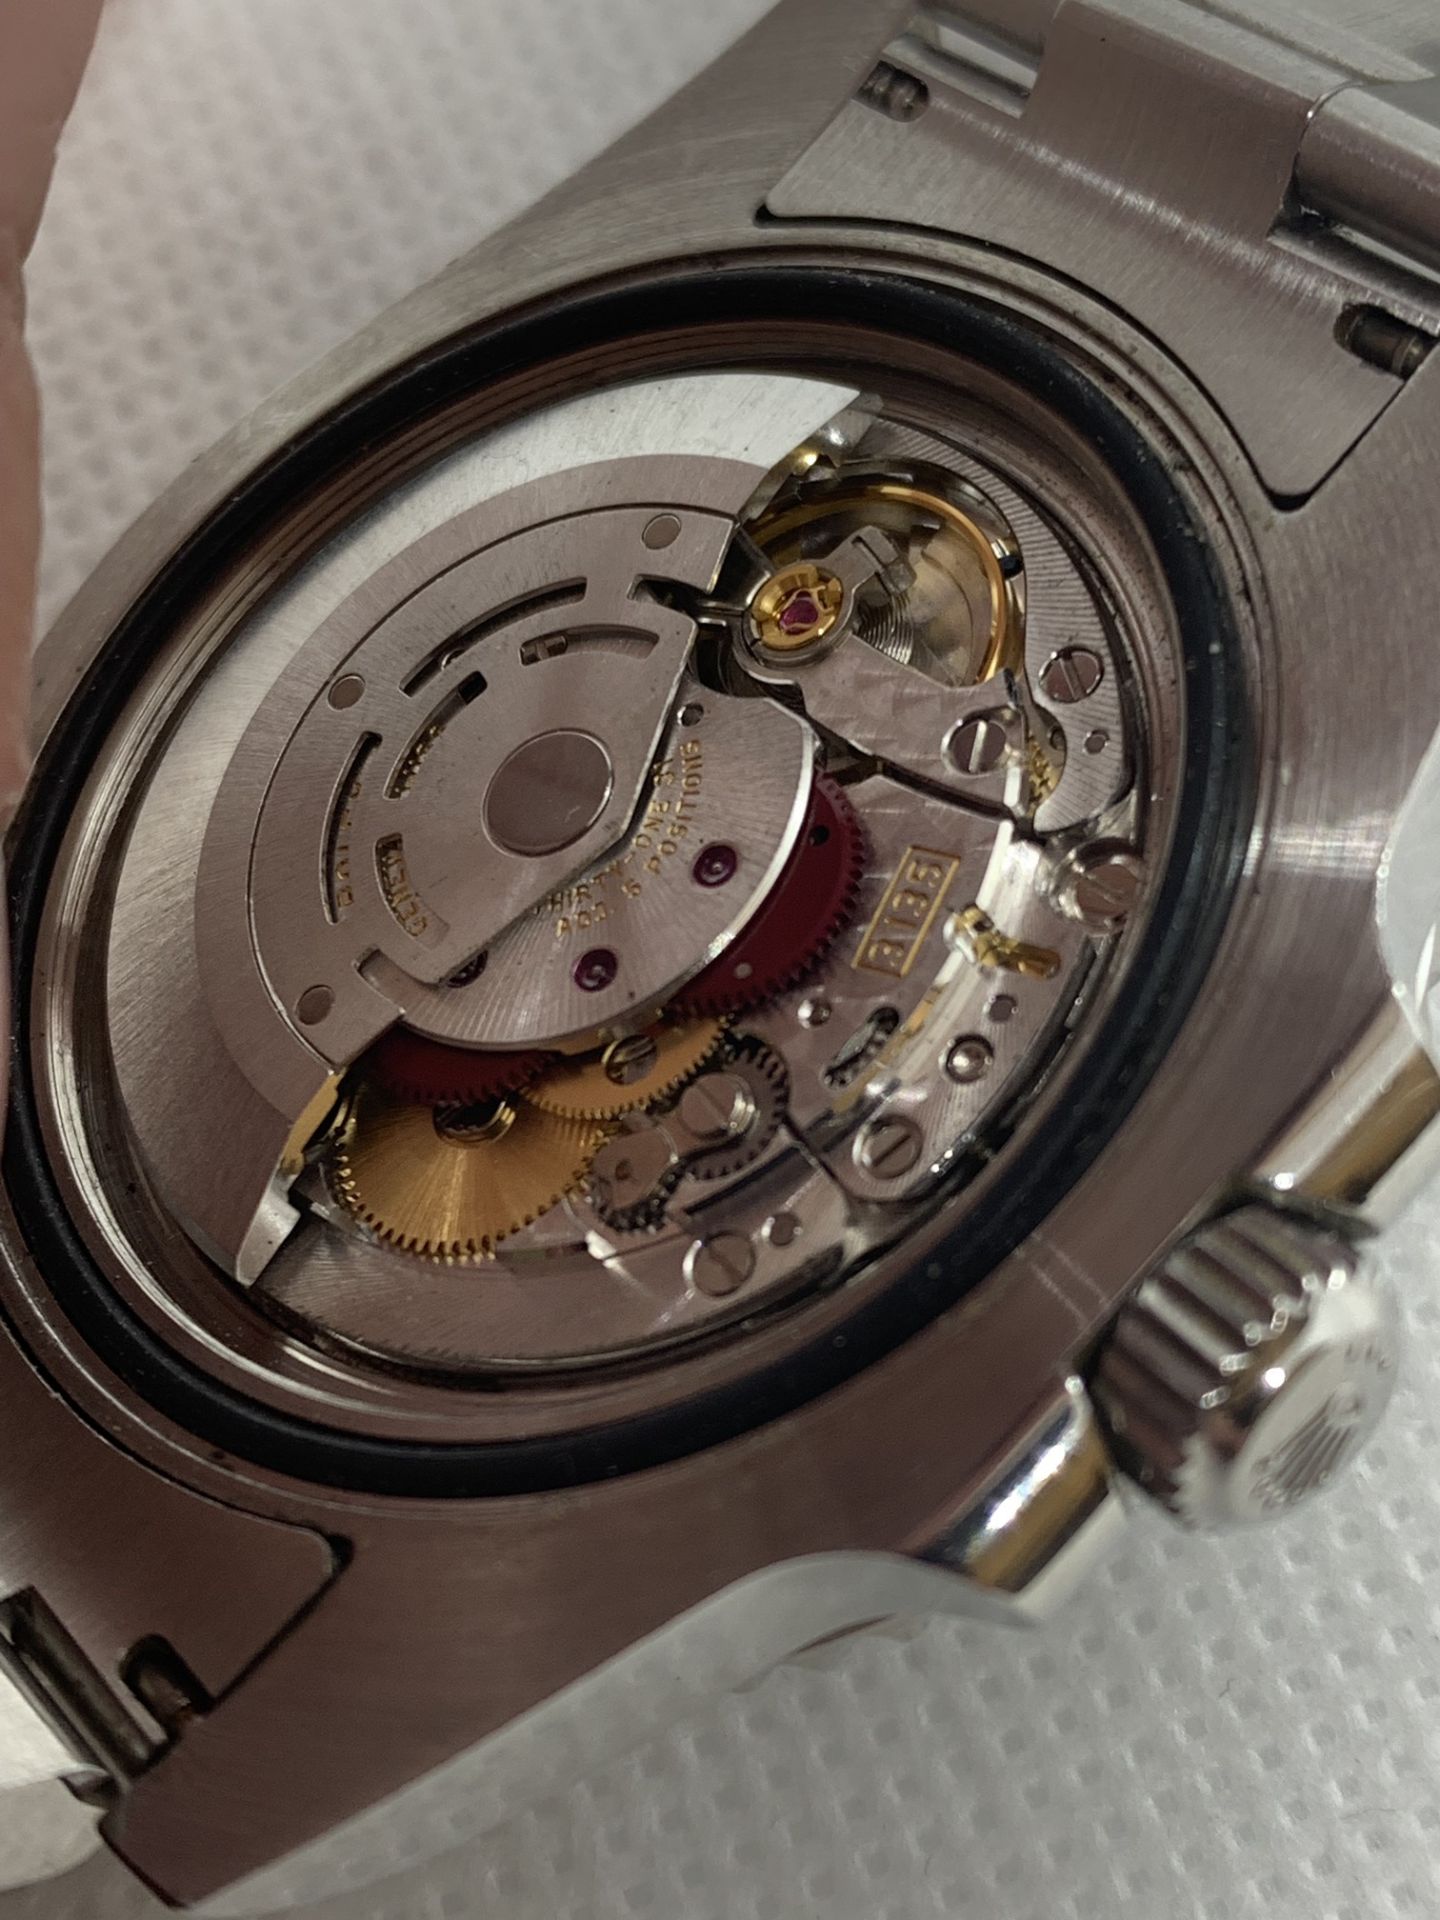 ROLEX SUBMARINER 3135 MOVEMENT WITH S/S METAL WATCH CASE - Image 7 of 13